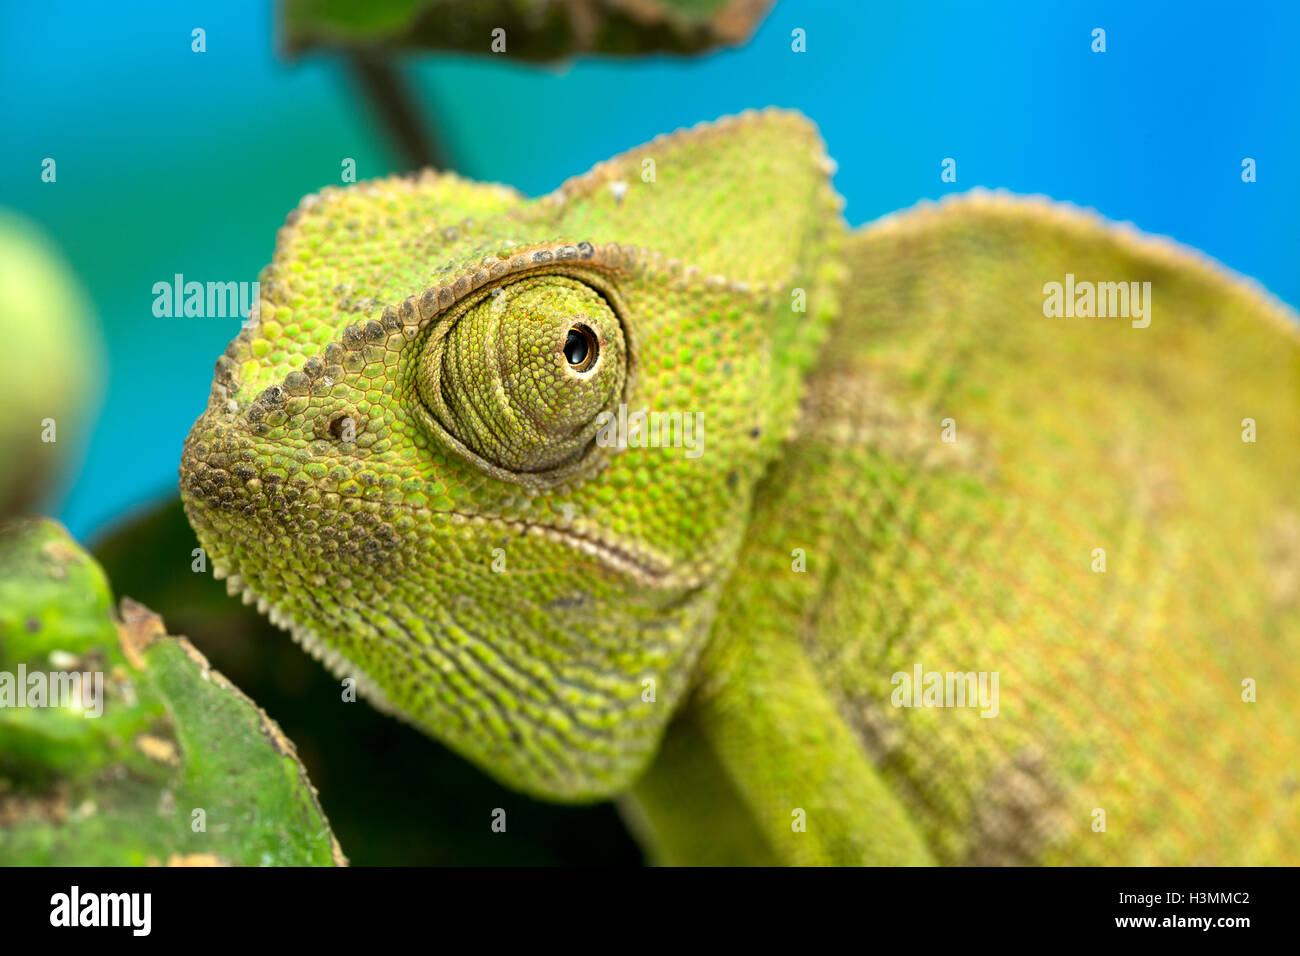 Close up of a green medium sized chameleon Stock Photo